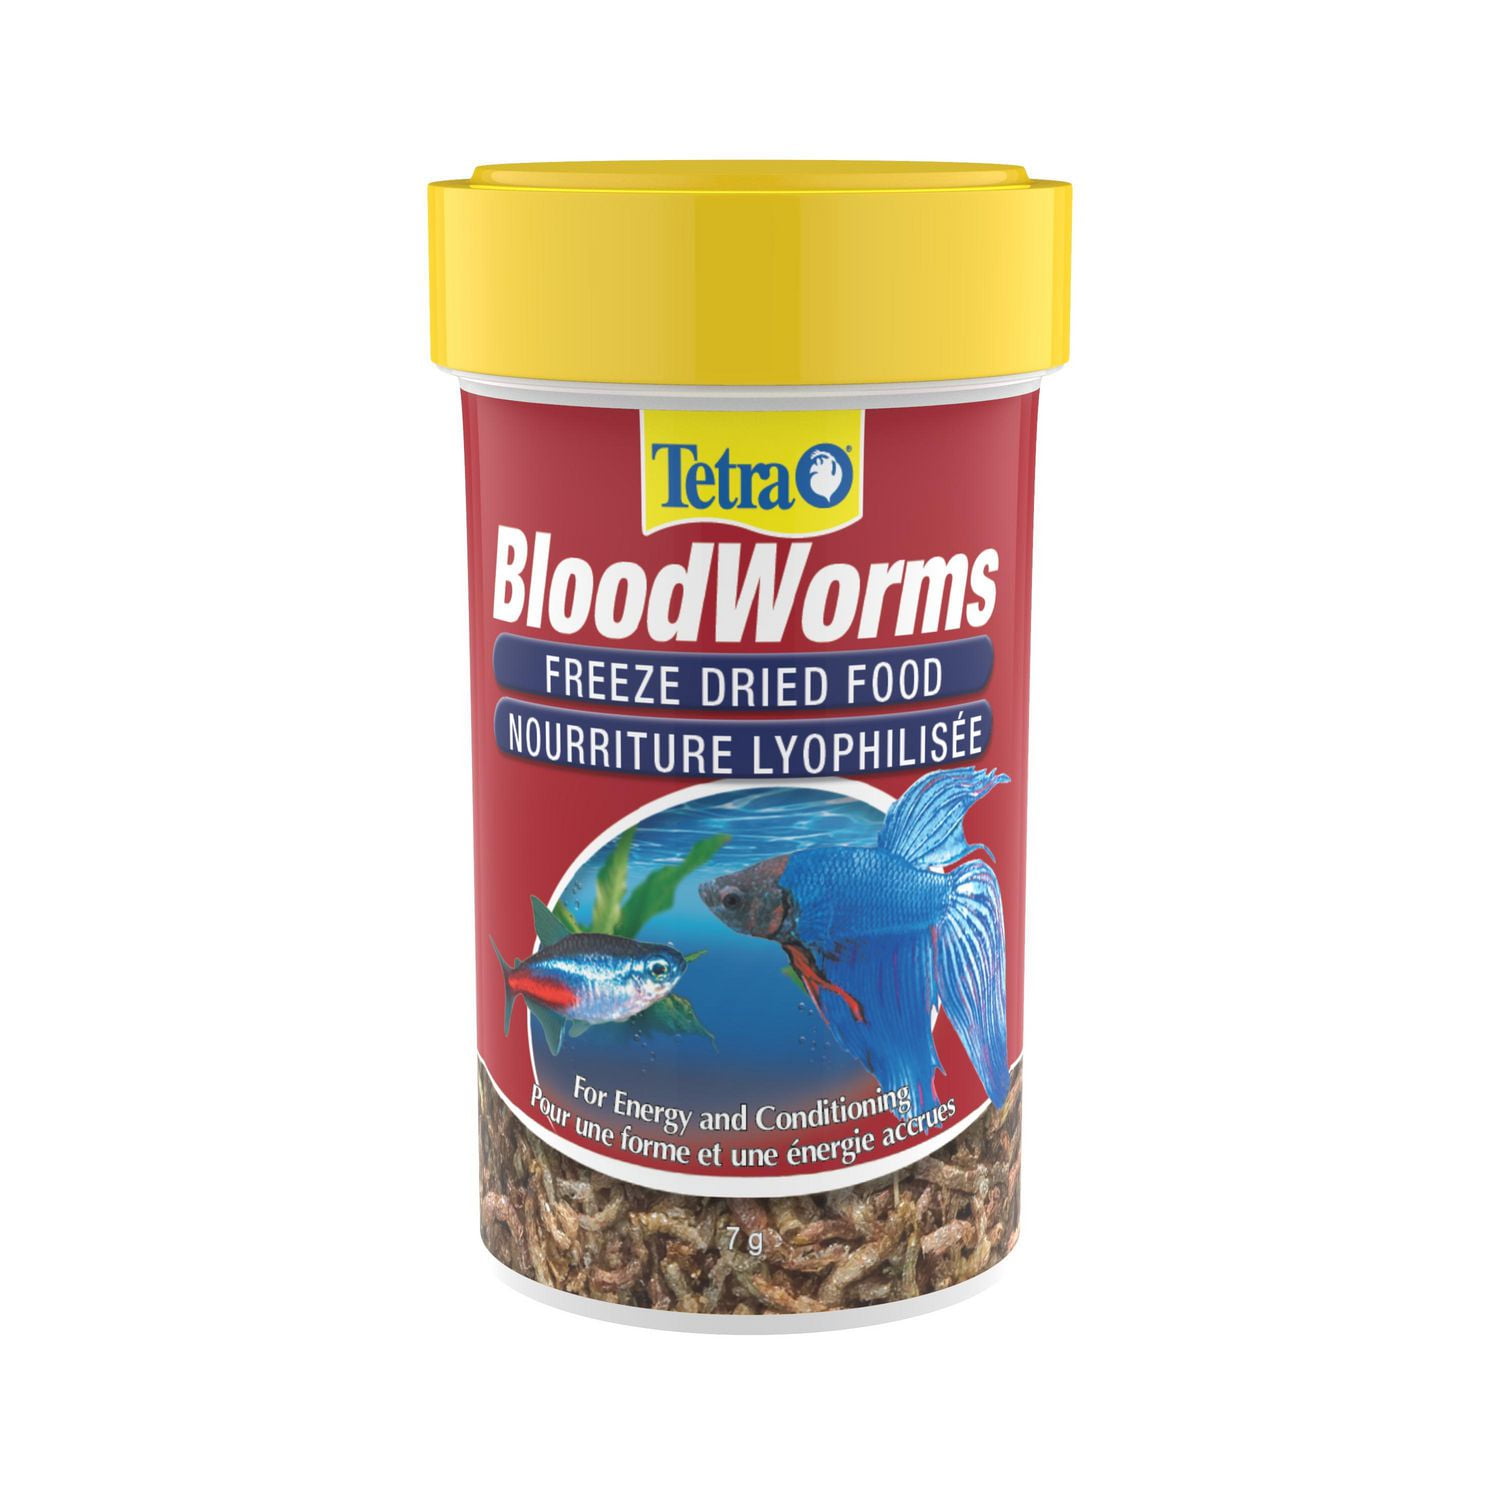 blood worms fishing, blood worms fishing Suppliers and Manufacturers at